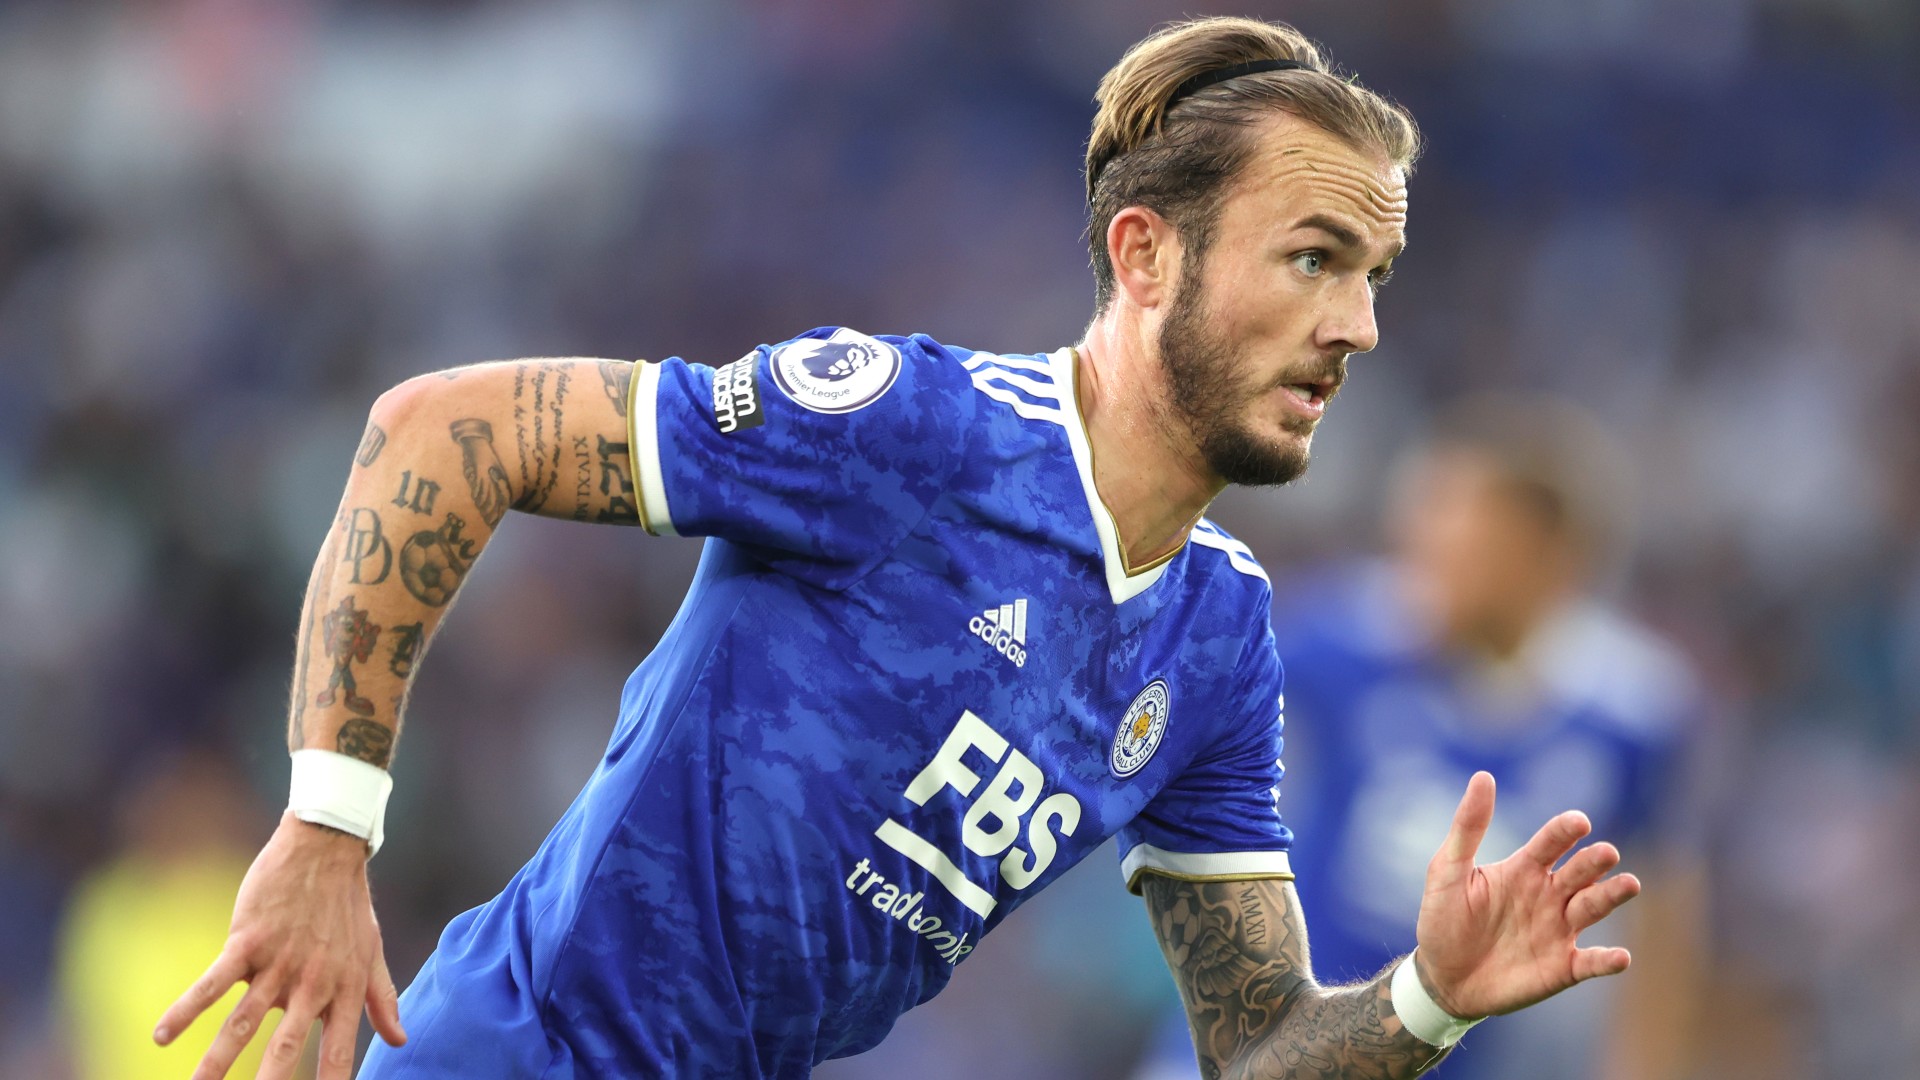 Arsenal-linked Maddison 'the same' as £100m Grealish as Leicester boss Rodgers reacts to transfer talk